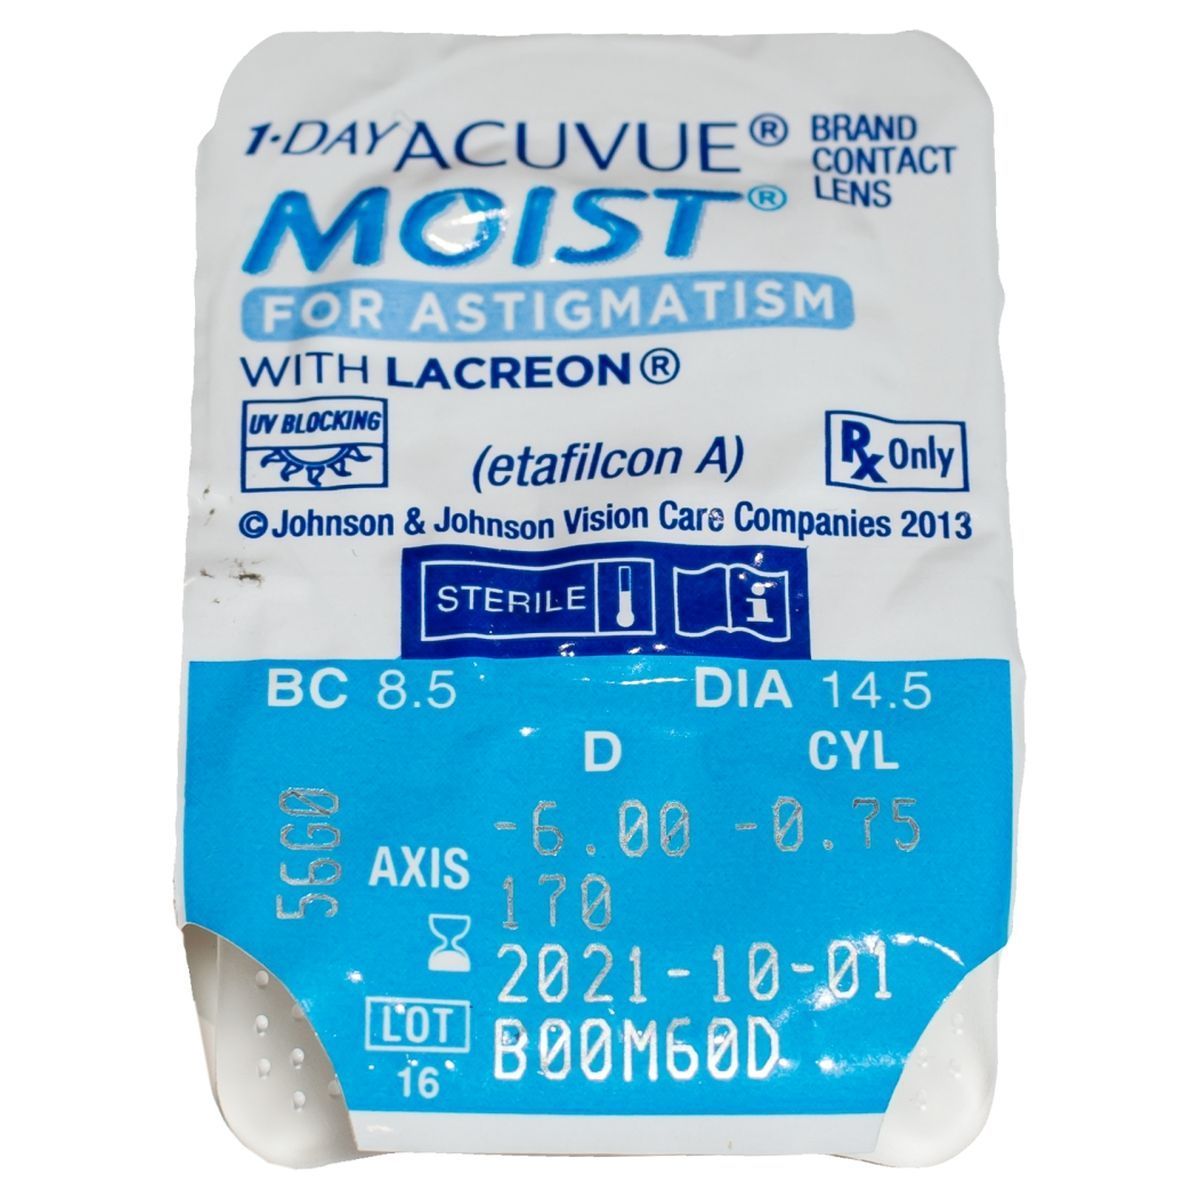 1-DAY ACUVUE MOIST FOR ASTIGMATISM DAILY DISPOSABLE CONTACT LENSES FOR ASTIGMATISM (30 LENSES)